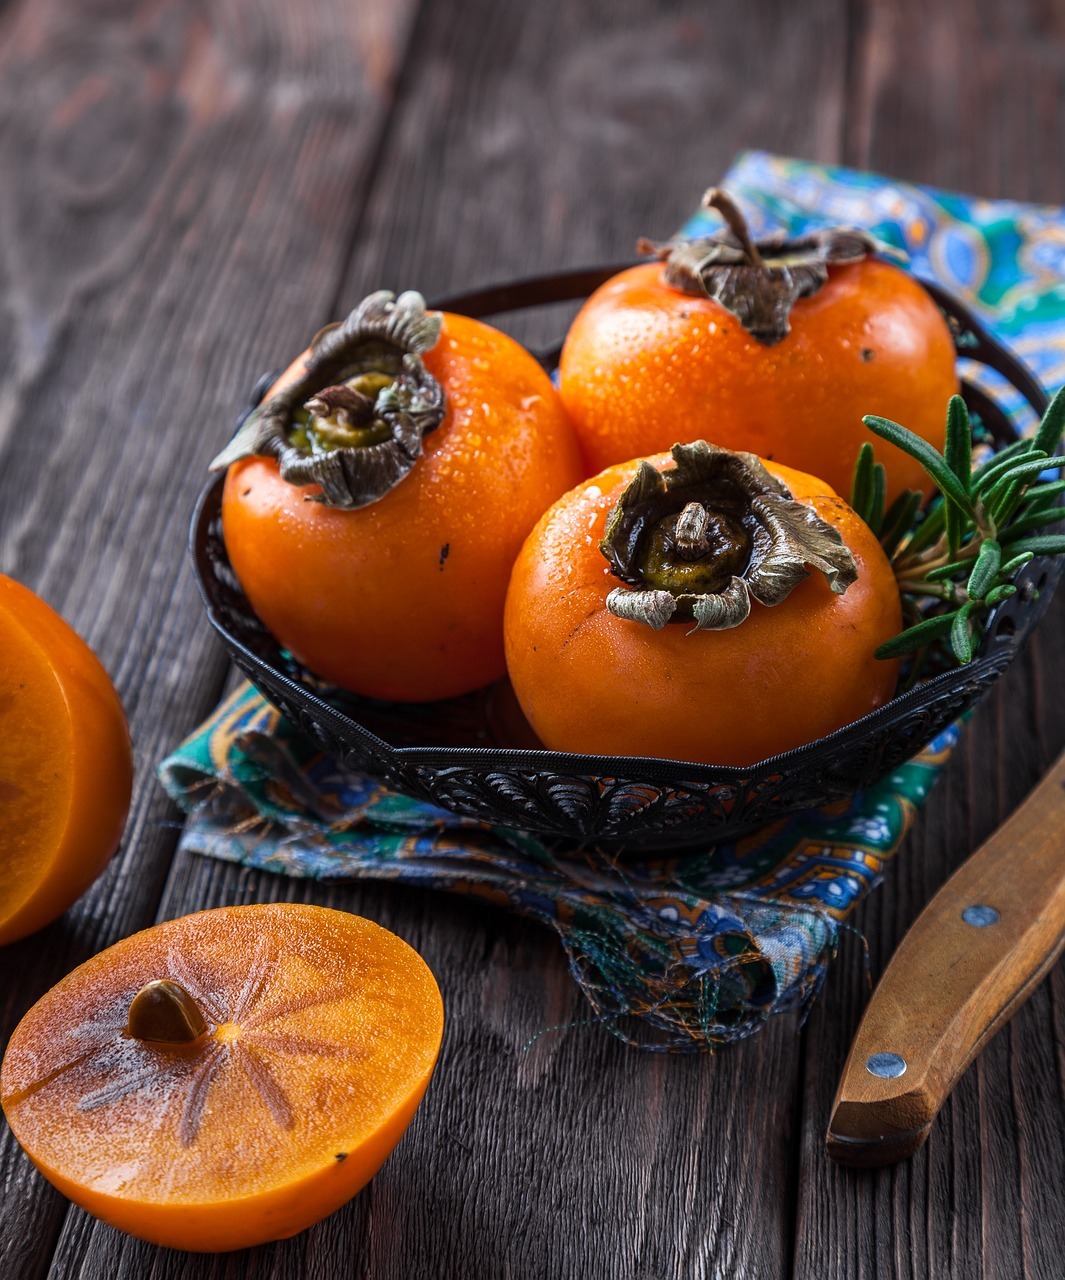 Persimmon Fruit-a Unique Taste in Your Home